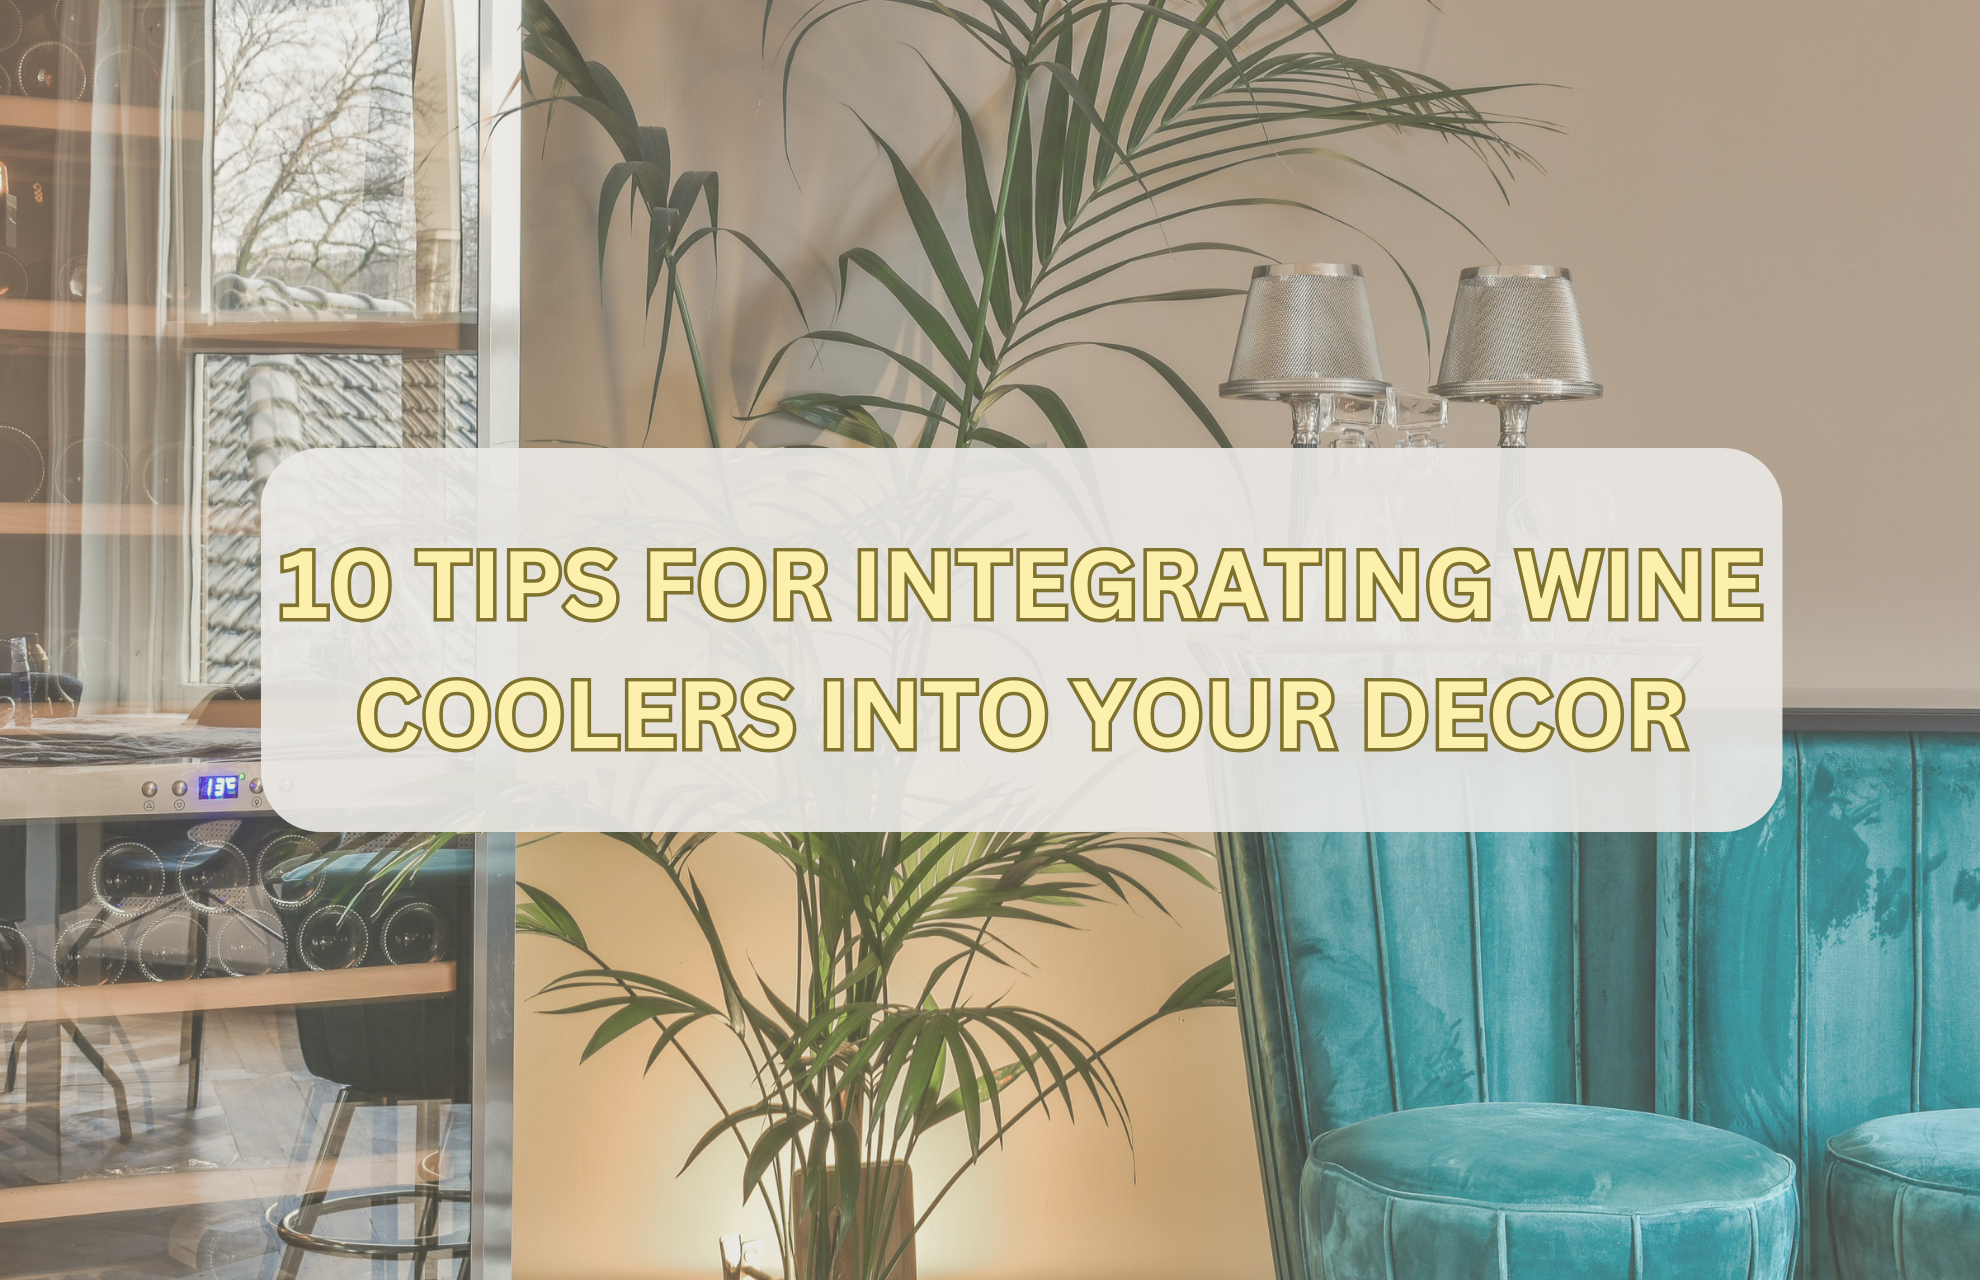 TIPS FOR INTEGRATING WINE COOLERS INTO YOUR DECOR